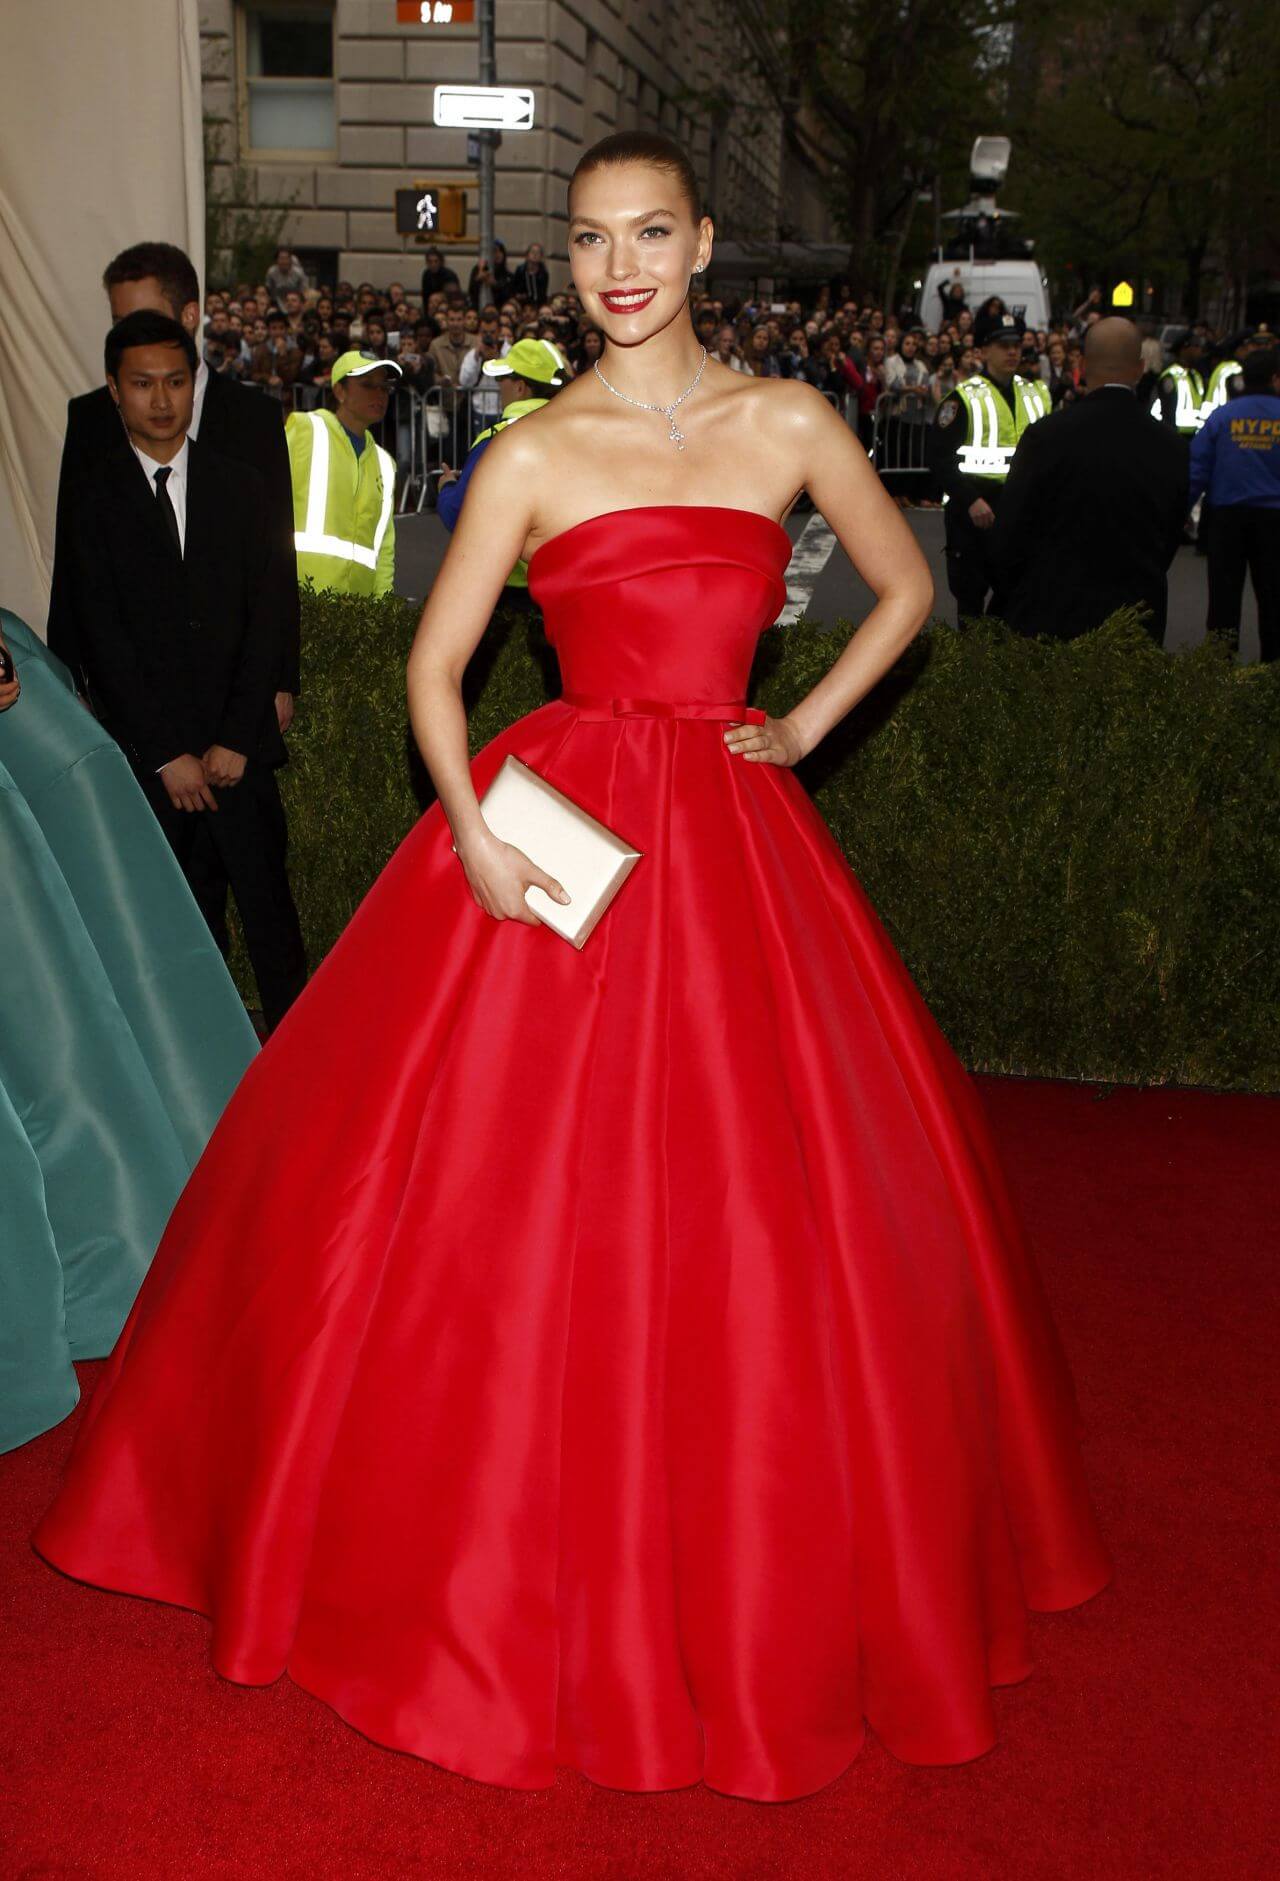 Arizona Muse In Red Strapless Pleated Ball Gown At ‘Charles James: Beyond Fashion Costume Institute Gala